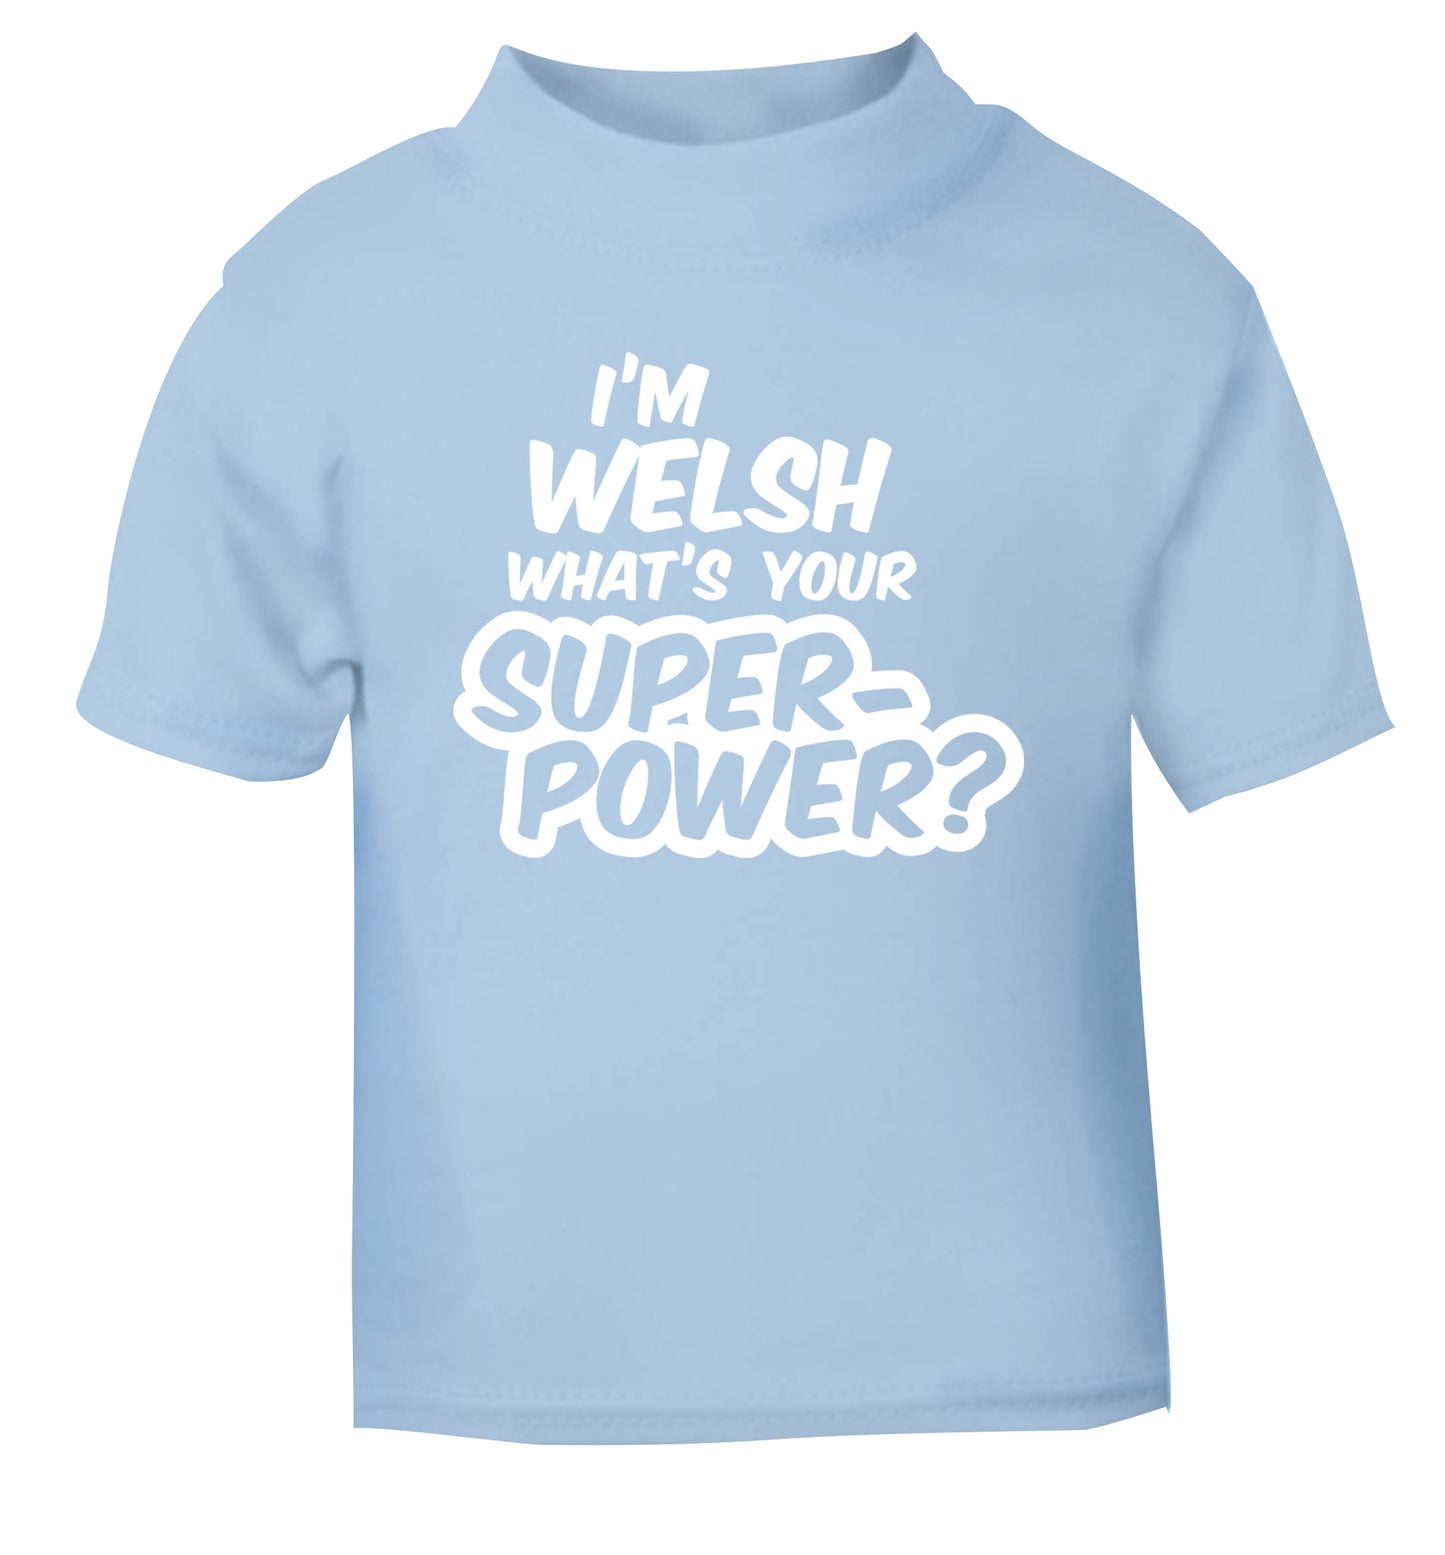 I'm Welsh what's your superpower? light blue Baby Toddler Tshirt 2 Years